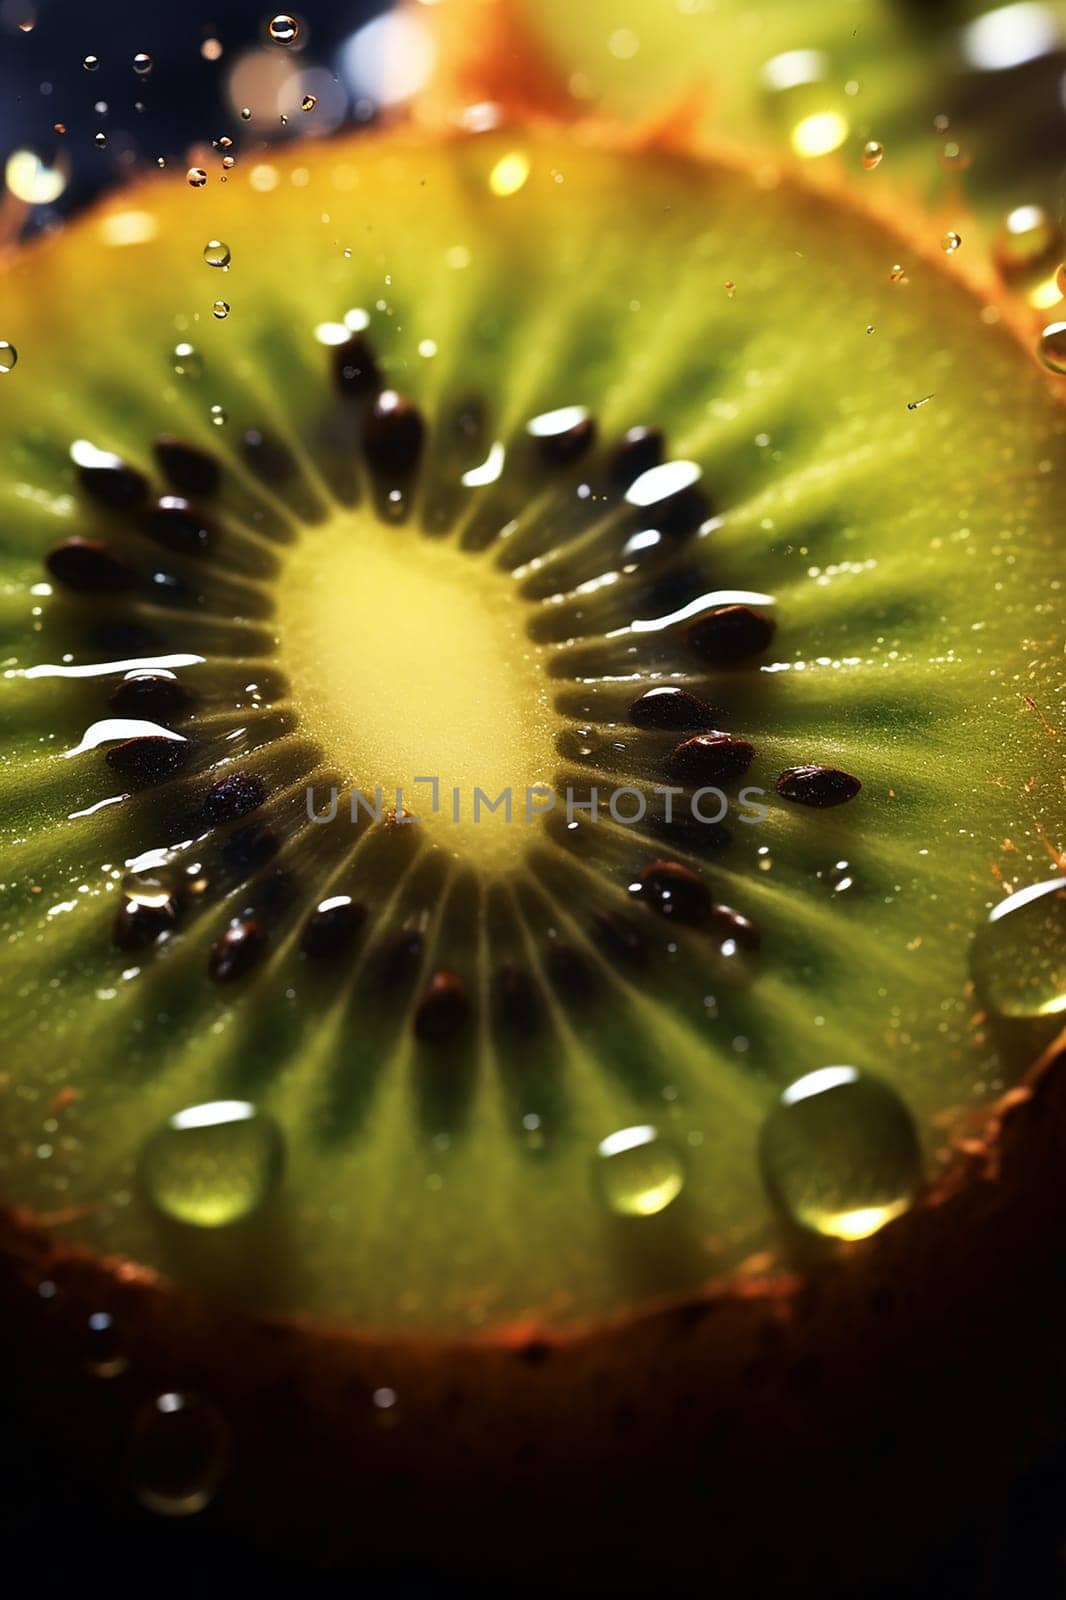 Close-up of a kiwi slice with water droplets highlighting its texture and colors.